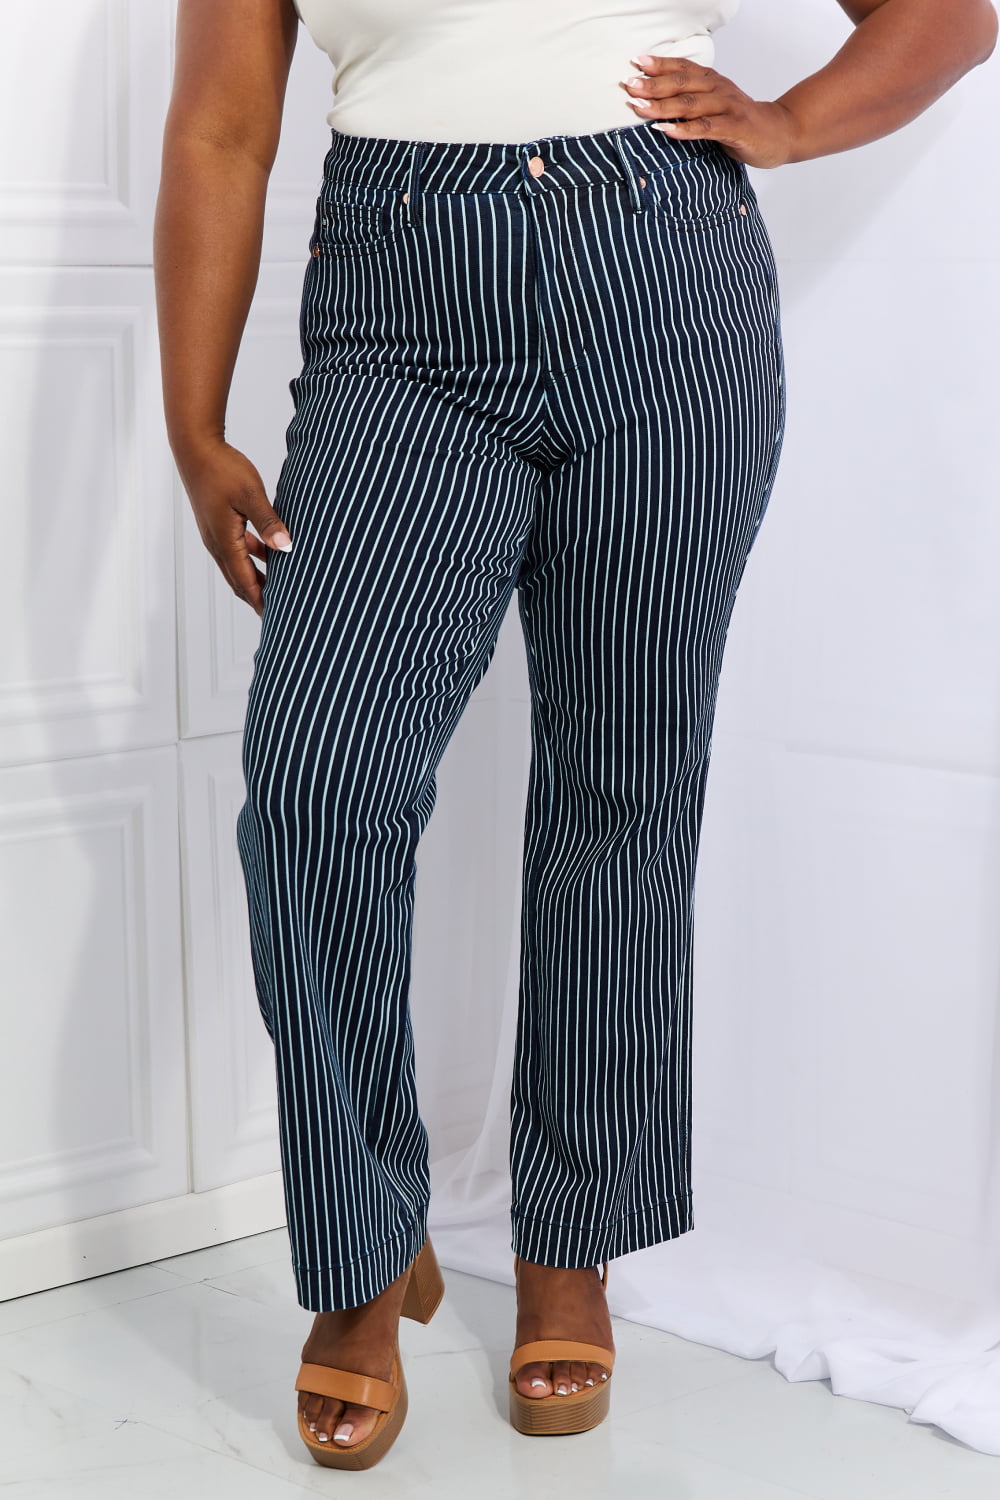 Judy Blue Cassidy Full Size High Waisted Tummy Control Striped Straight Jeans - Tigbul's Fashion